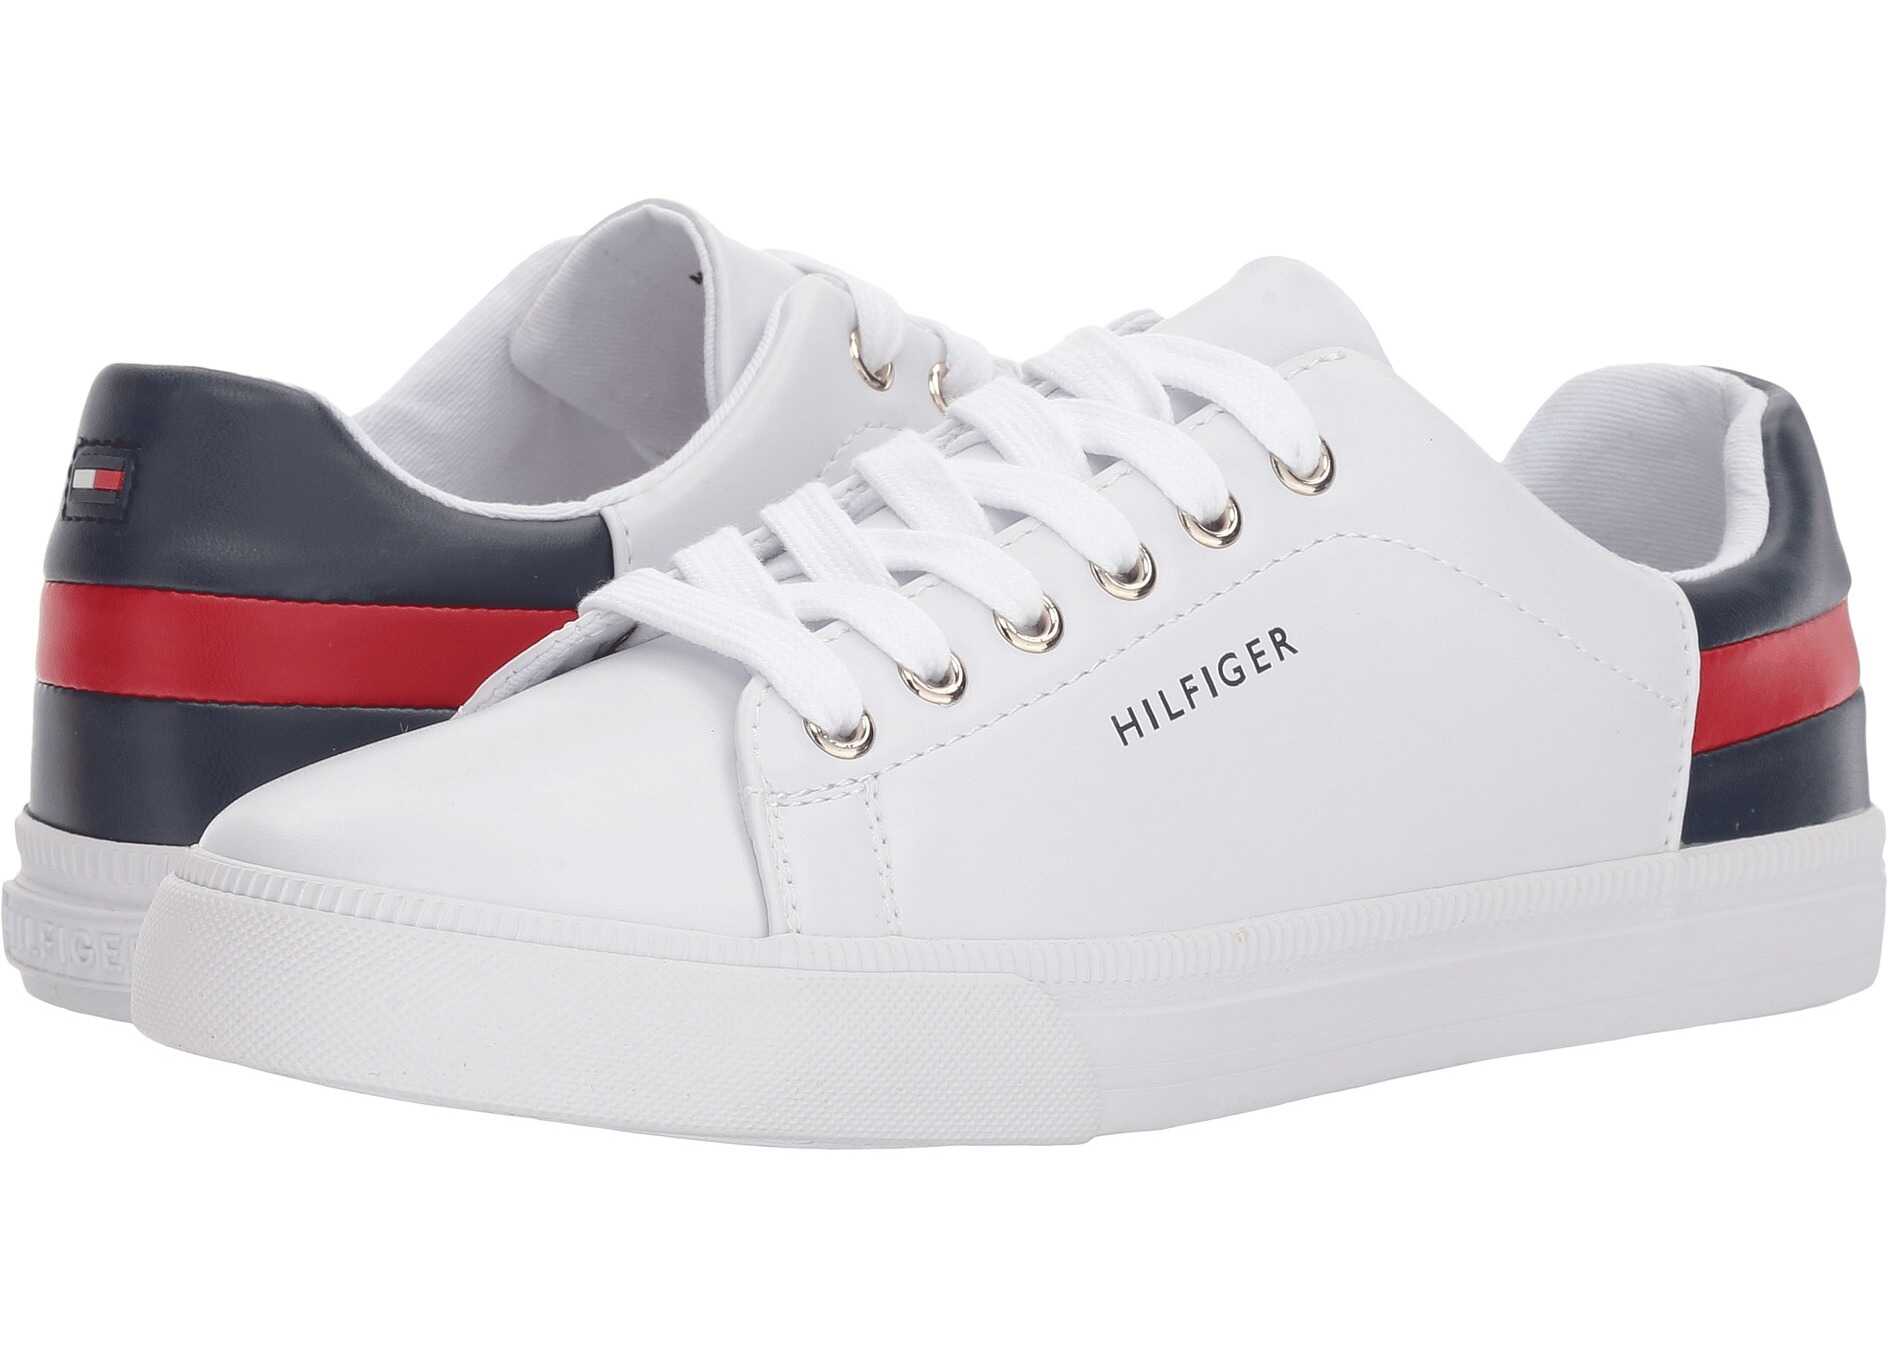 Tommy Hilfiger Laddin* White/Red/Deep Baltic